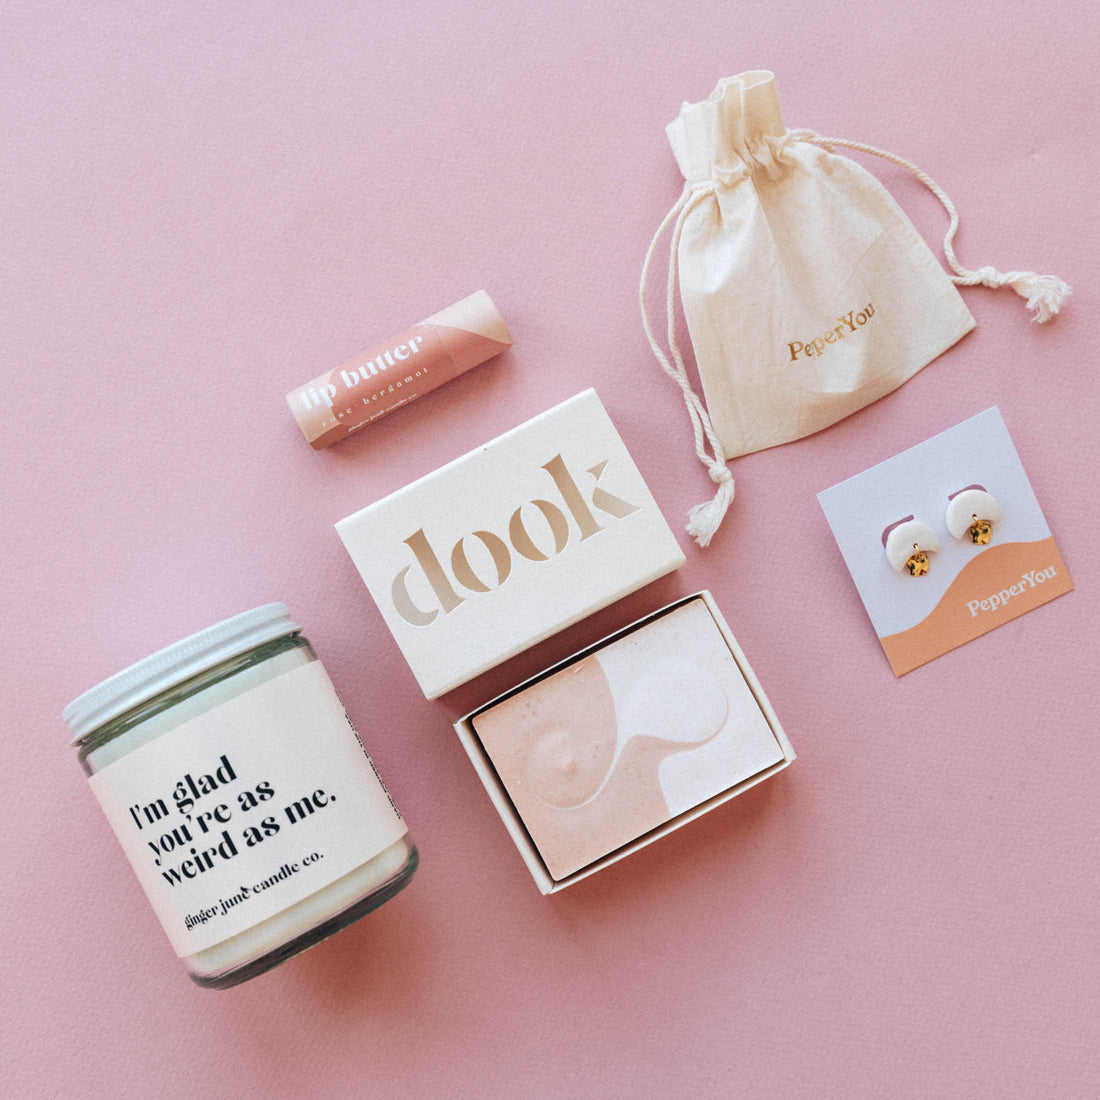 9 Small Business Gifts your Bestie will Love!